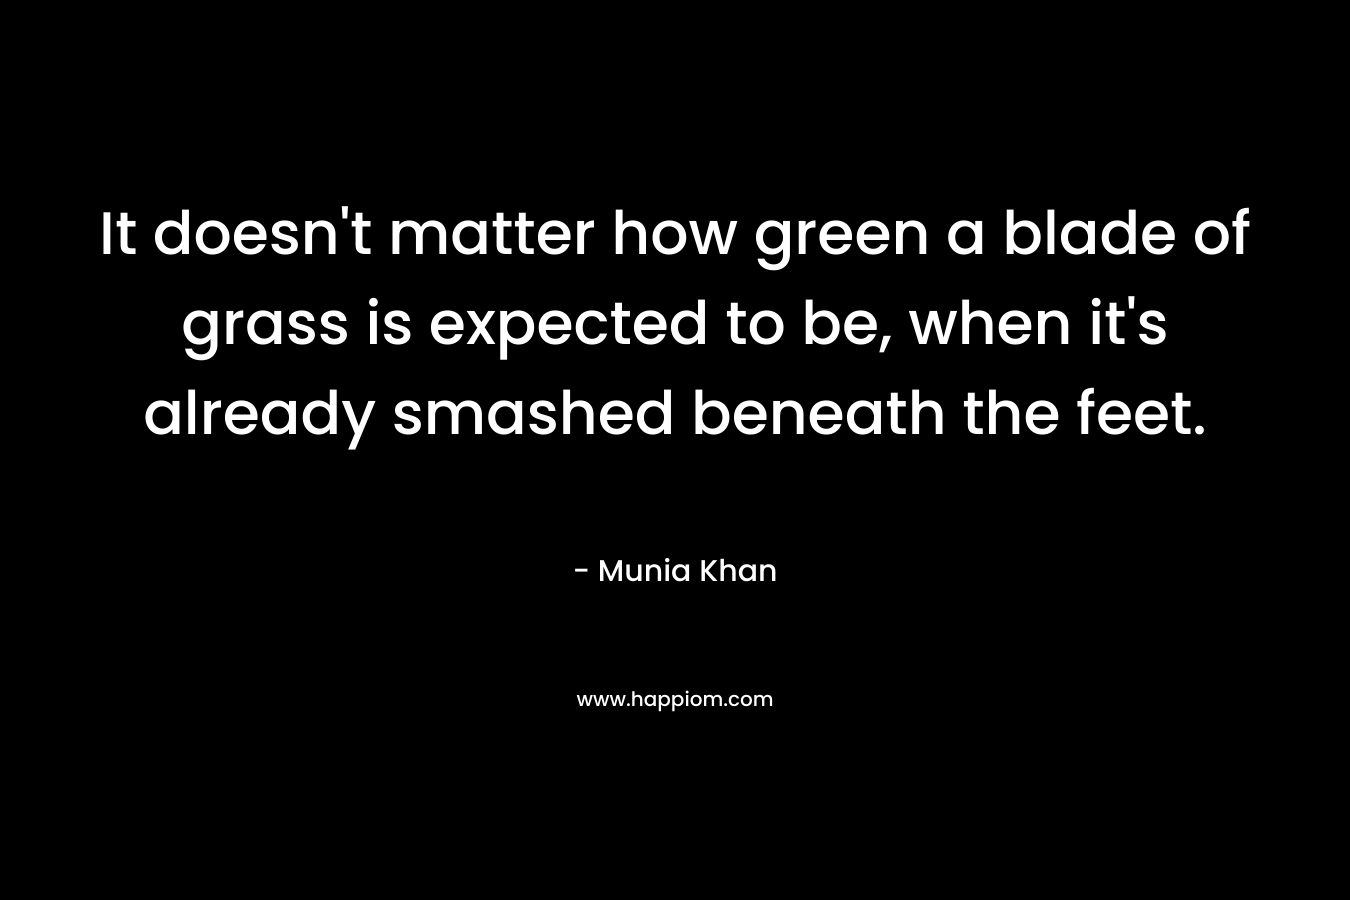 It doesn't matter how green a blade of grass is expected to be, when it's already smashed beneath the feet.